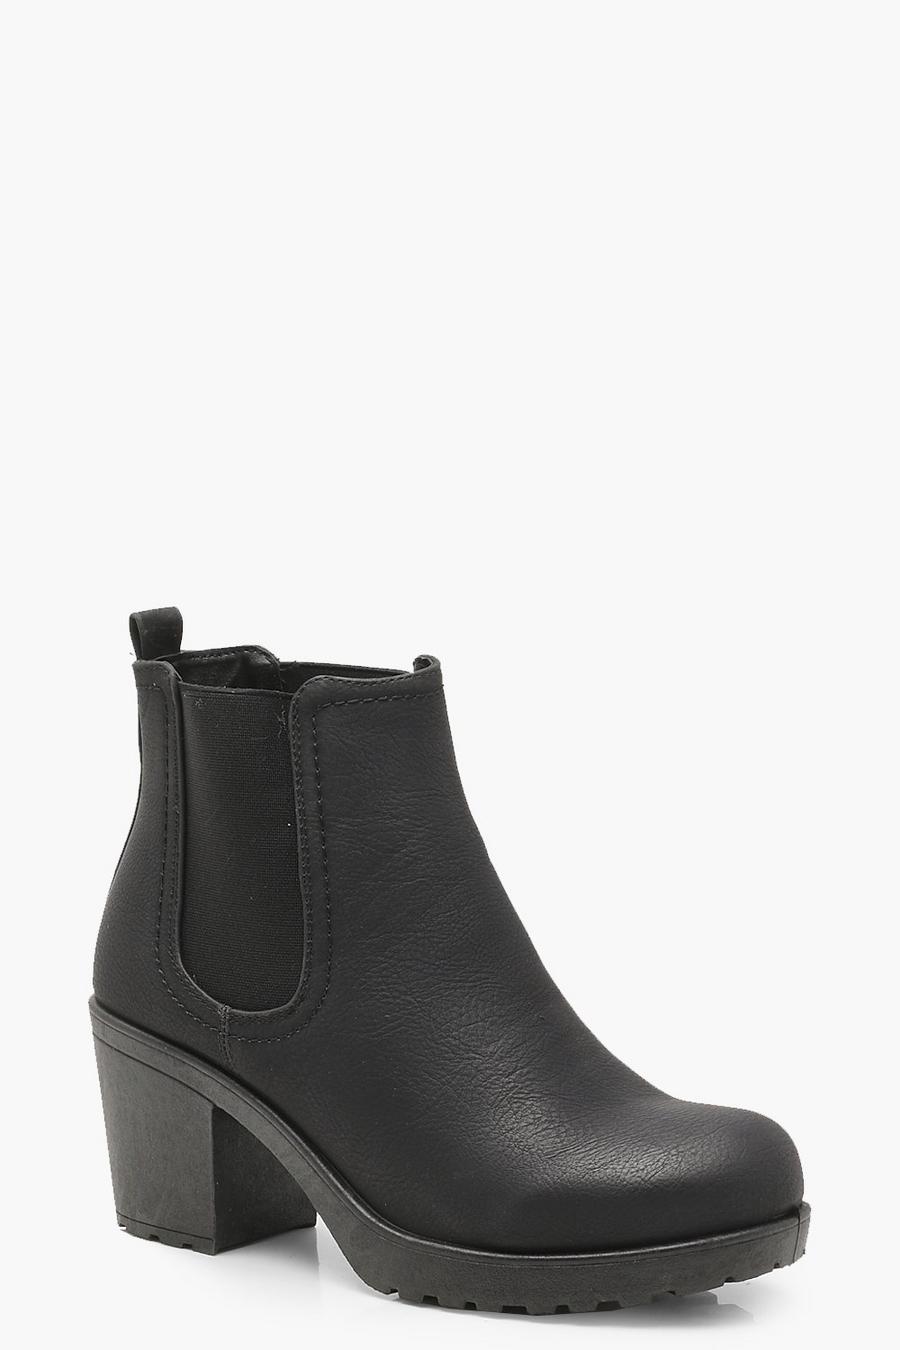 Black Wide Width Chunky Cleated Heel Chelsea Boots image number 1